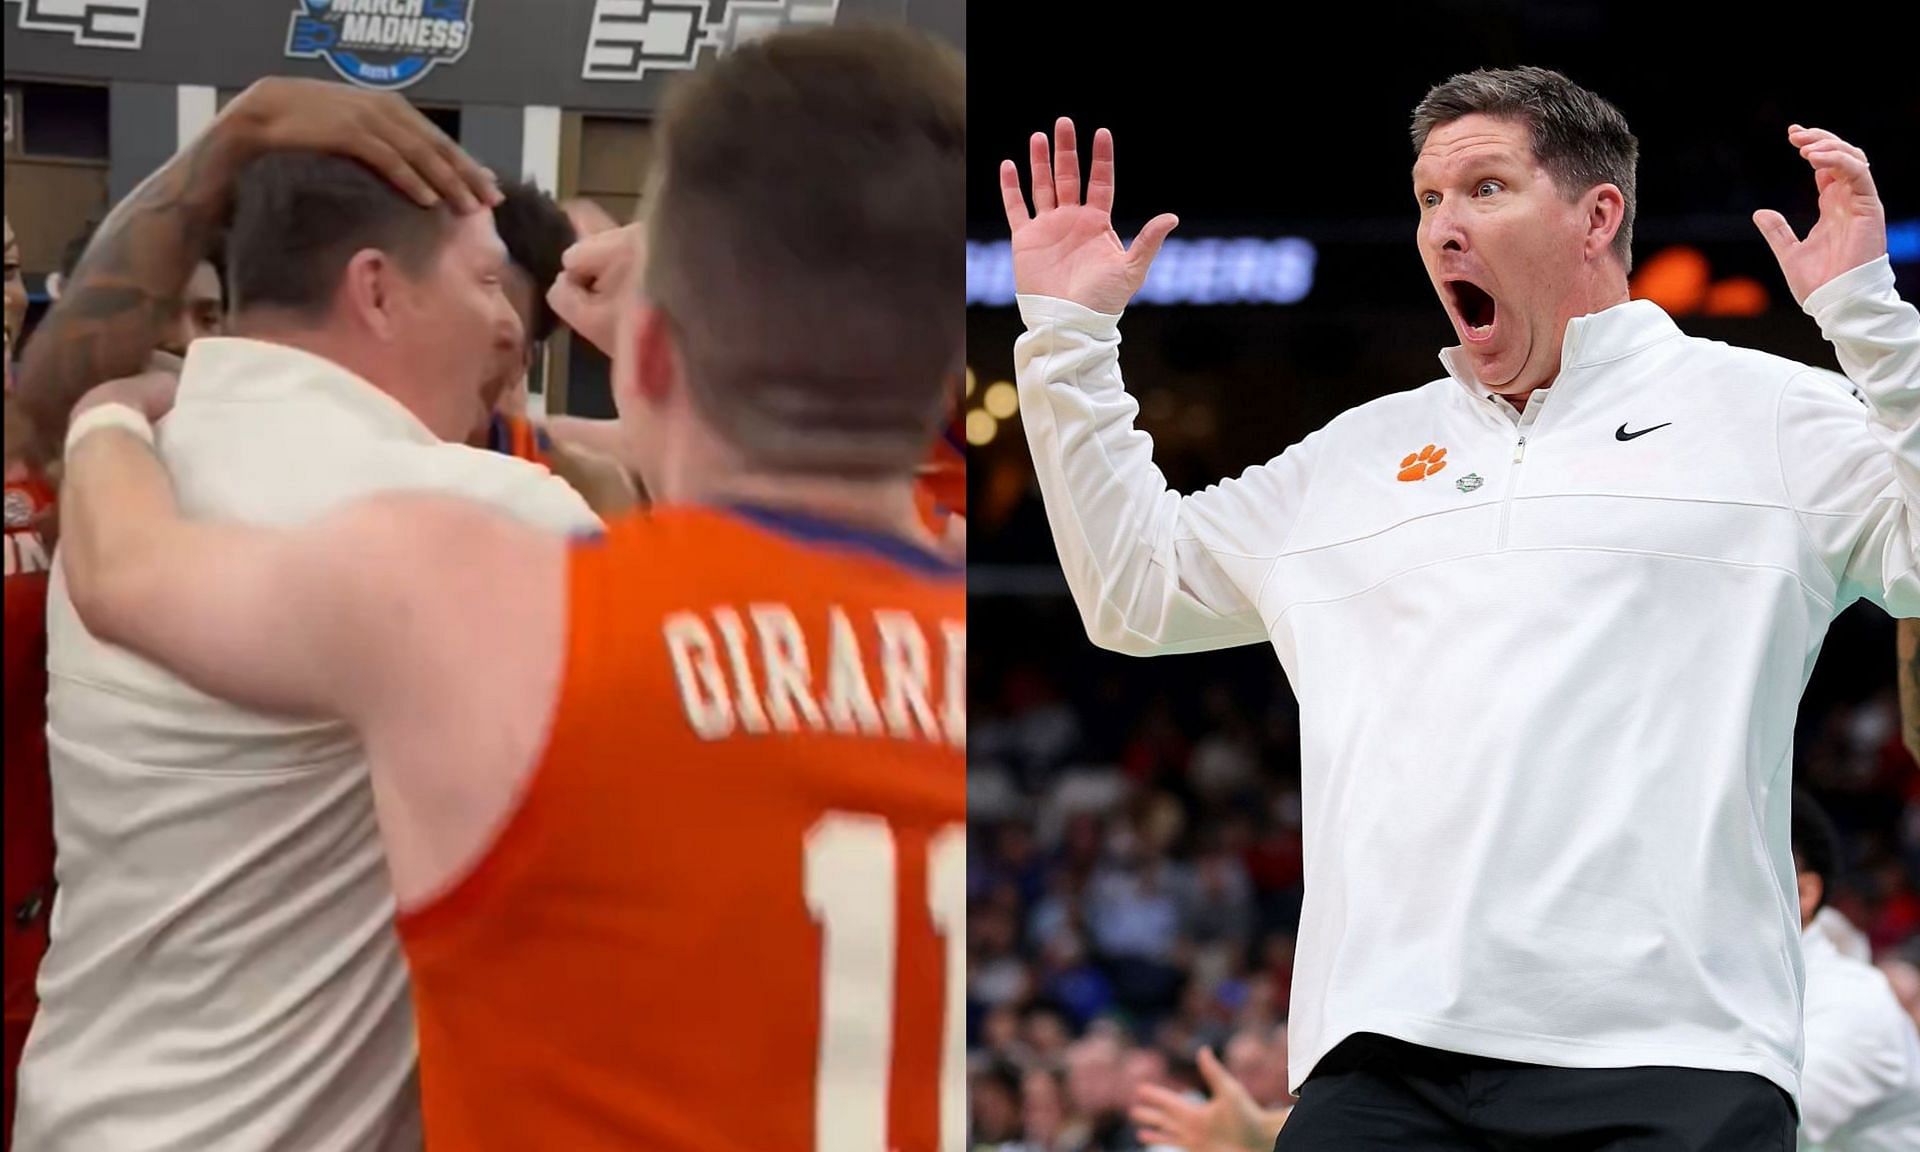 Clemson head coach Brad Brownell and his team rejoice after an impressive victory in the Sweet 16 over Arizona, led by star player Caleb Love.